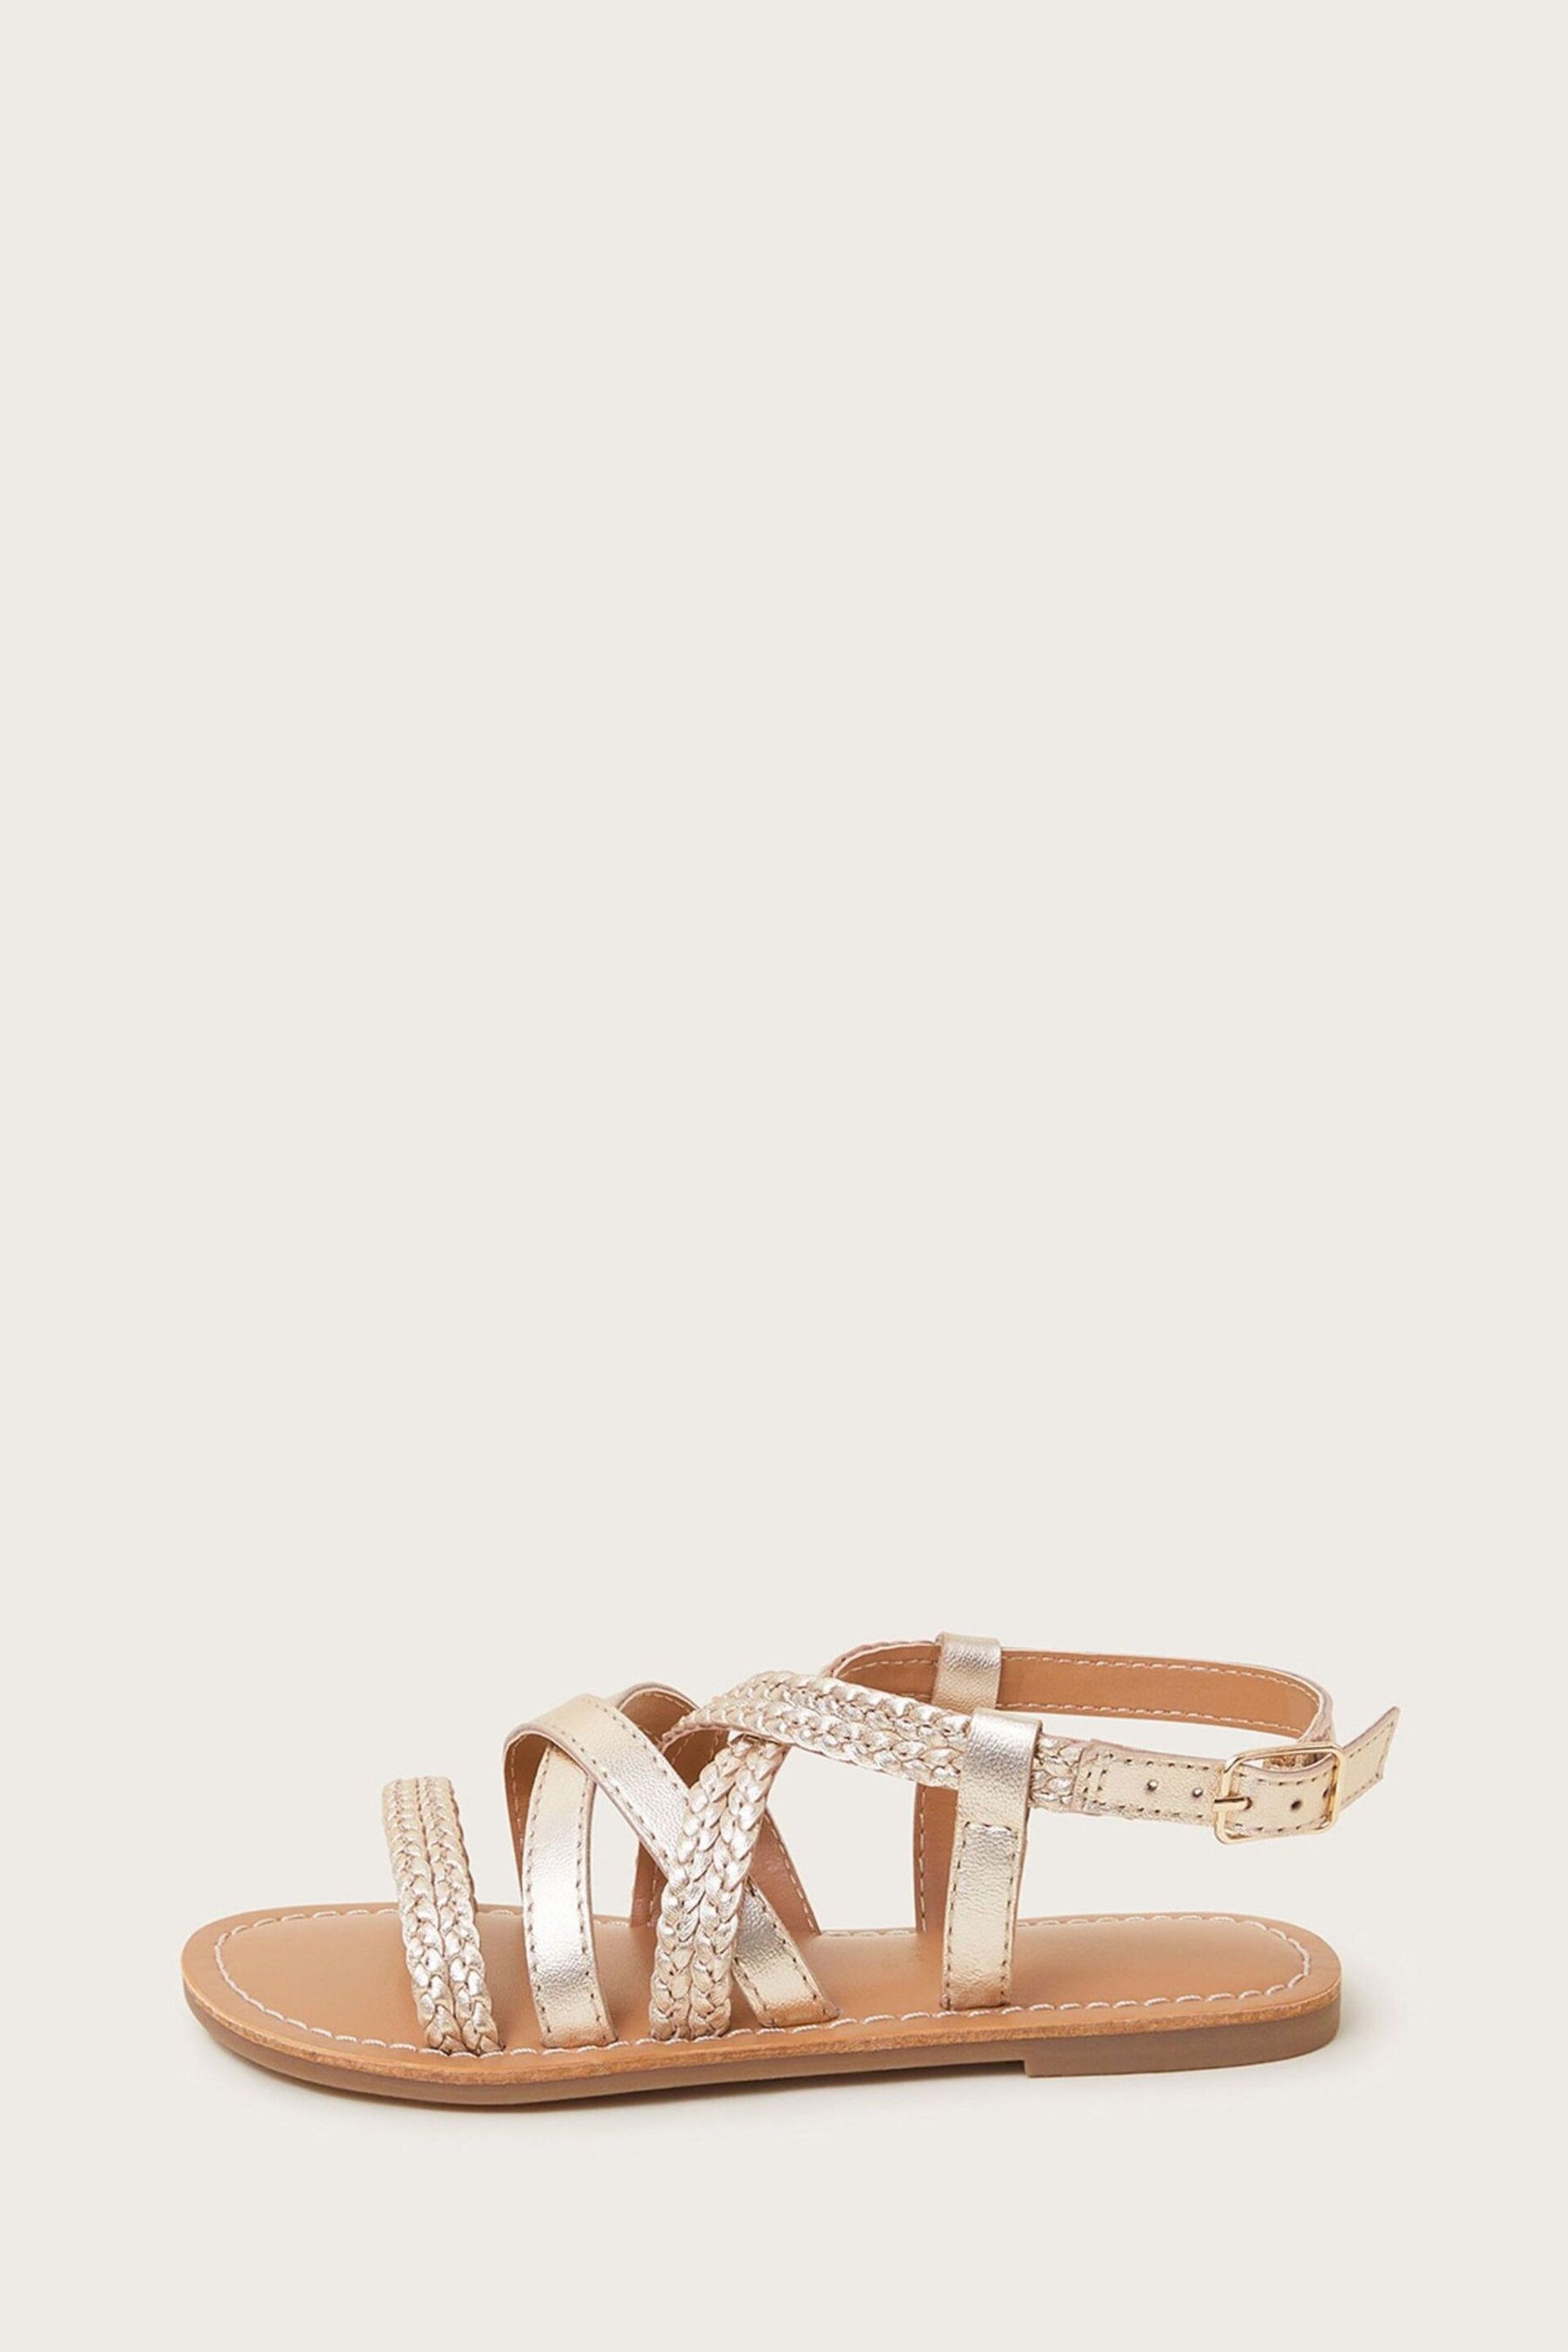 Monsoon Gold Leather Plaited Sandals - Image 2 of 3